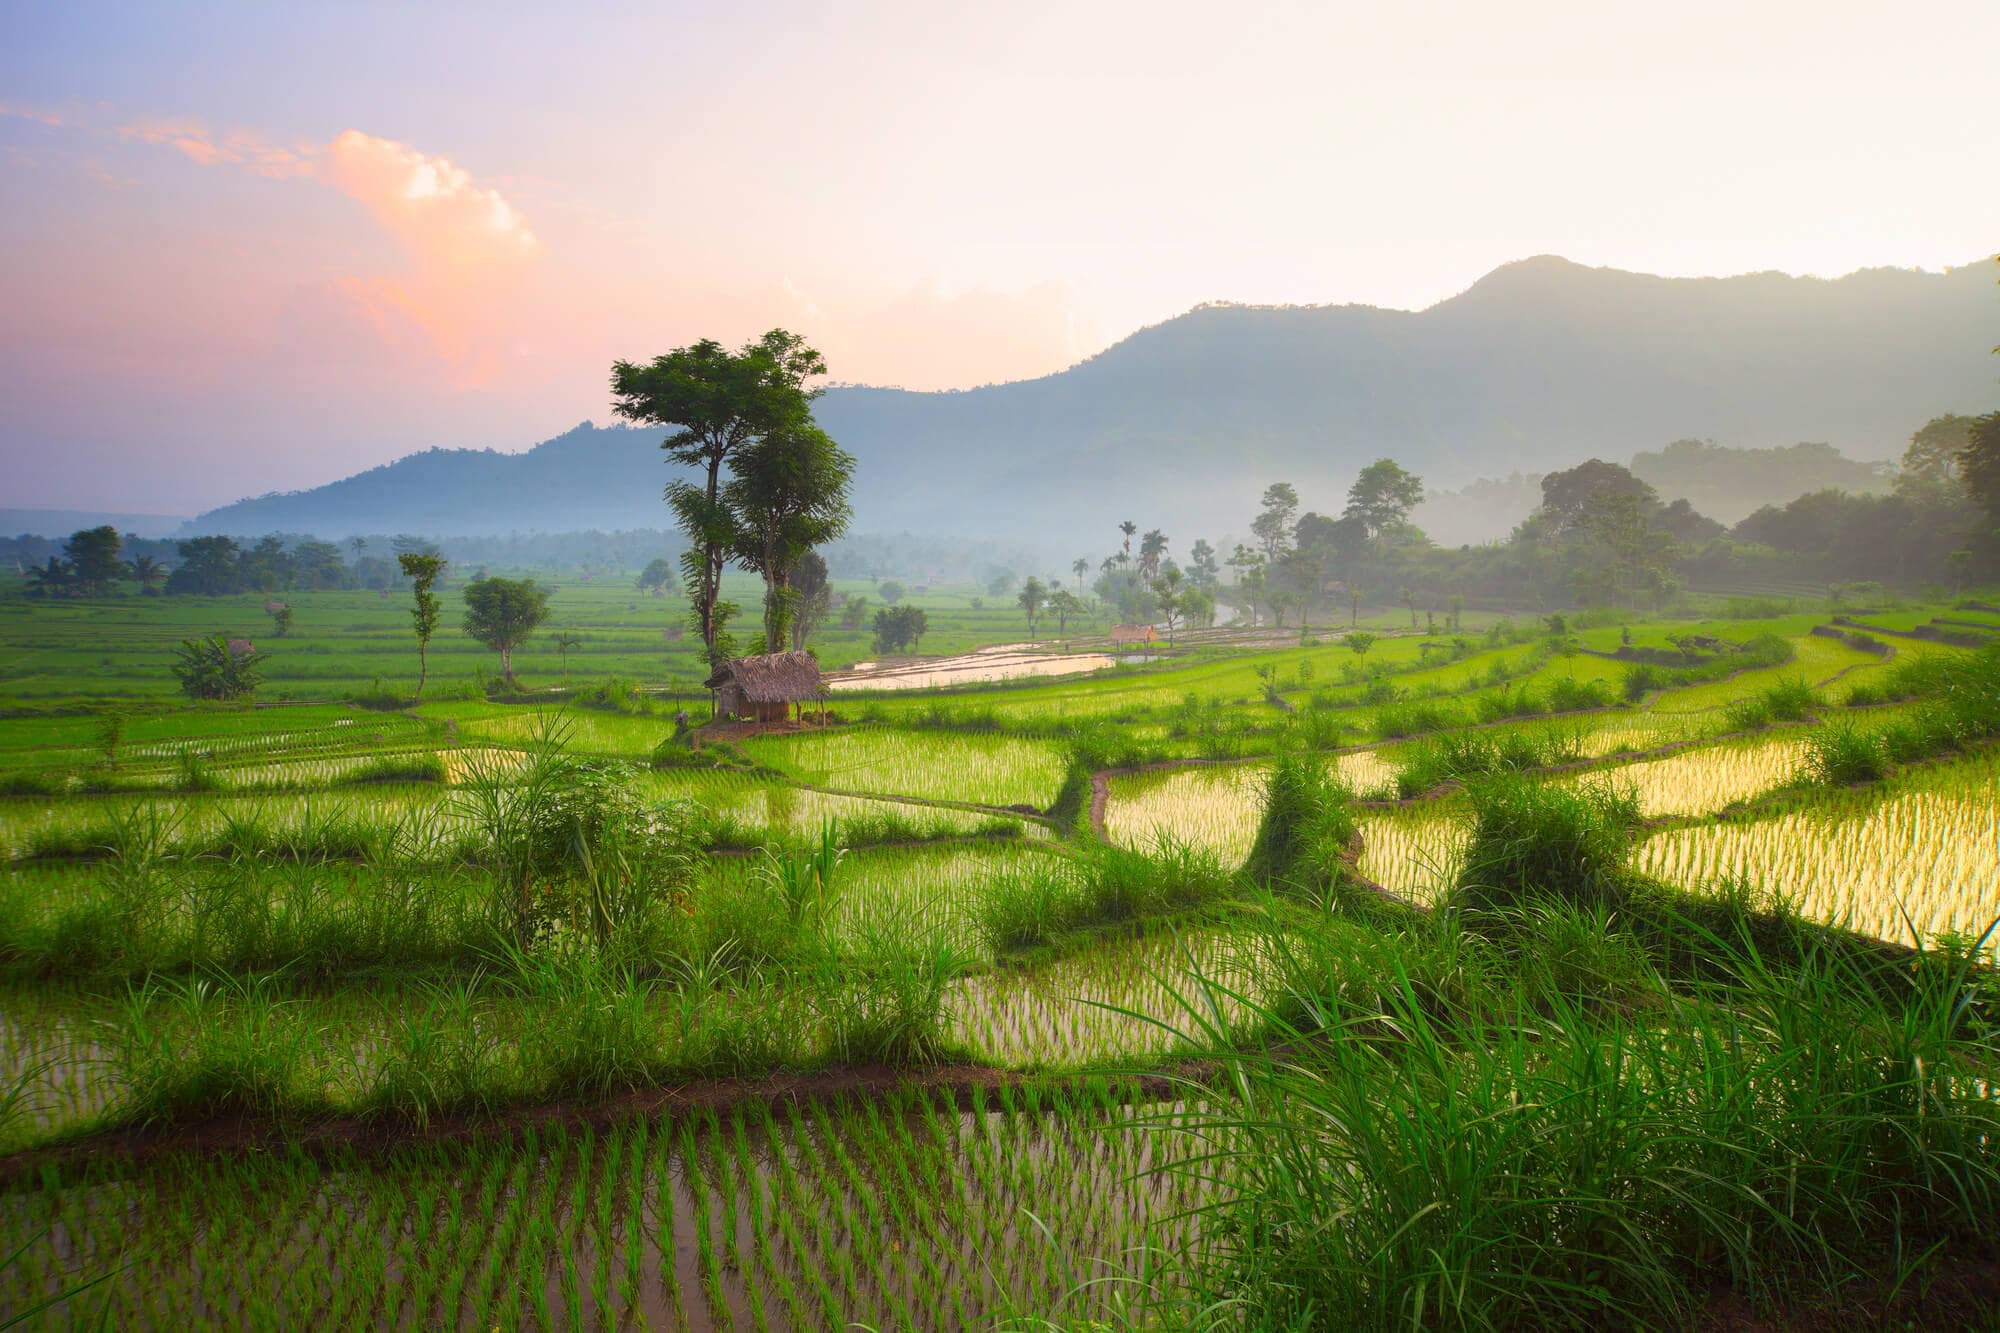 Sunrise over rice fields in Bali - 17 things you need to know before visiting Bali